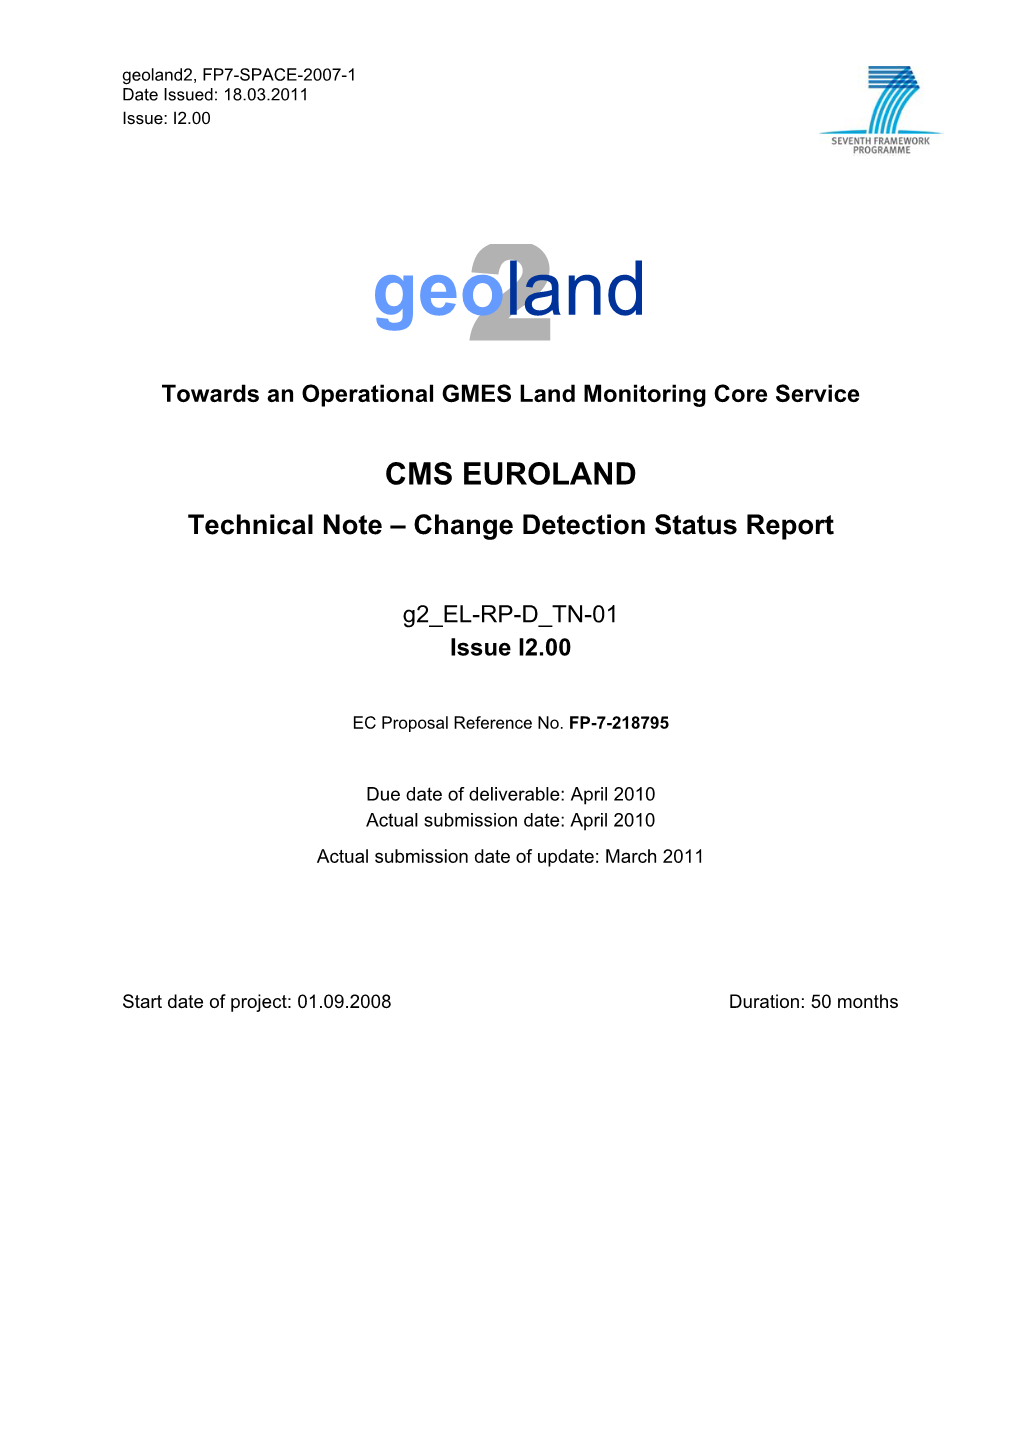 Change Detection Methods Recommended by Euroland